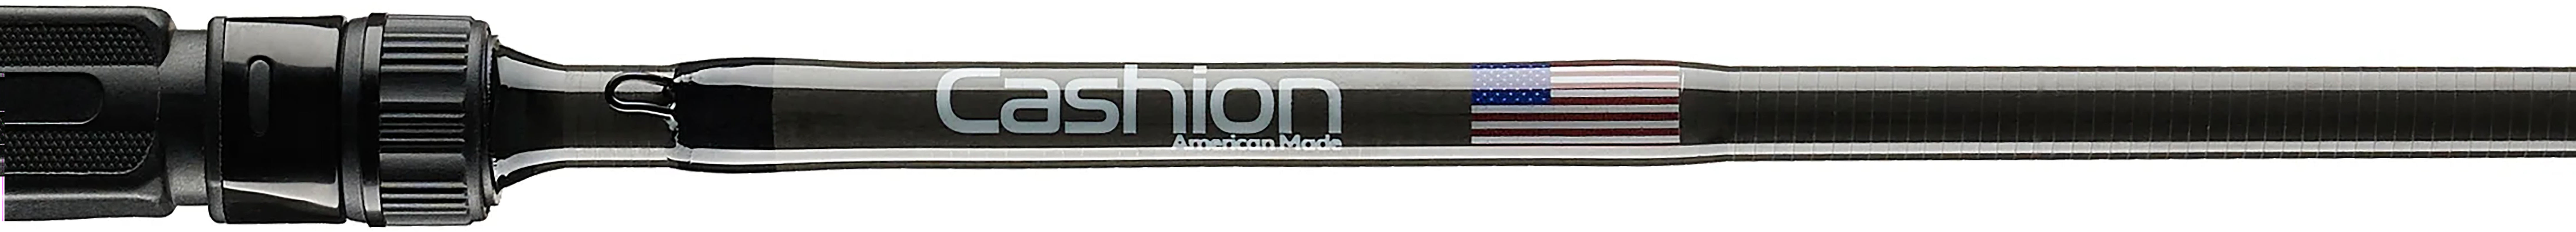 Cashion ICON Series Saltwater Finesse Ned Rig Casting Rod